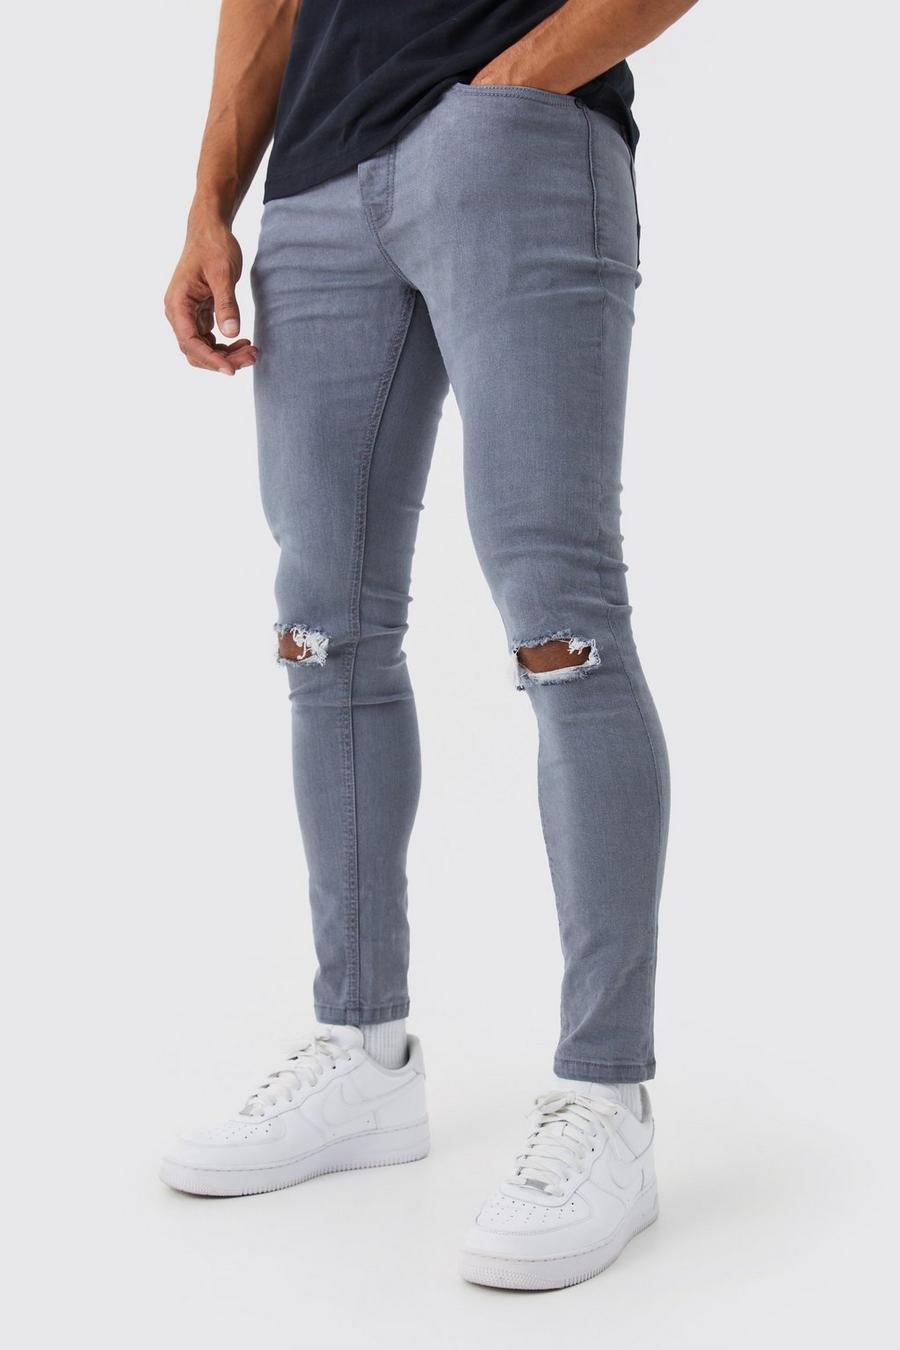 Mid grey Super Skinny Stretch Ripped Knee Jeans